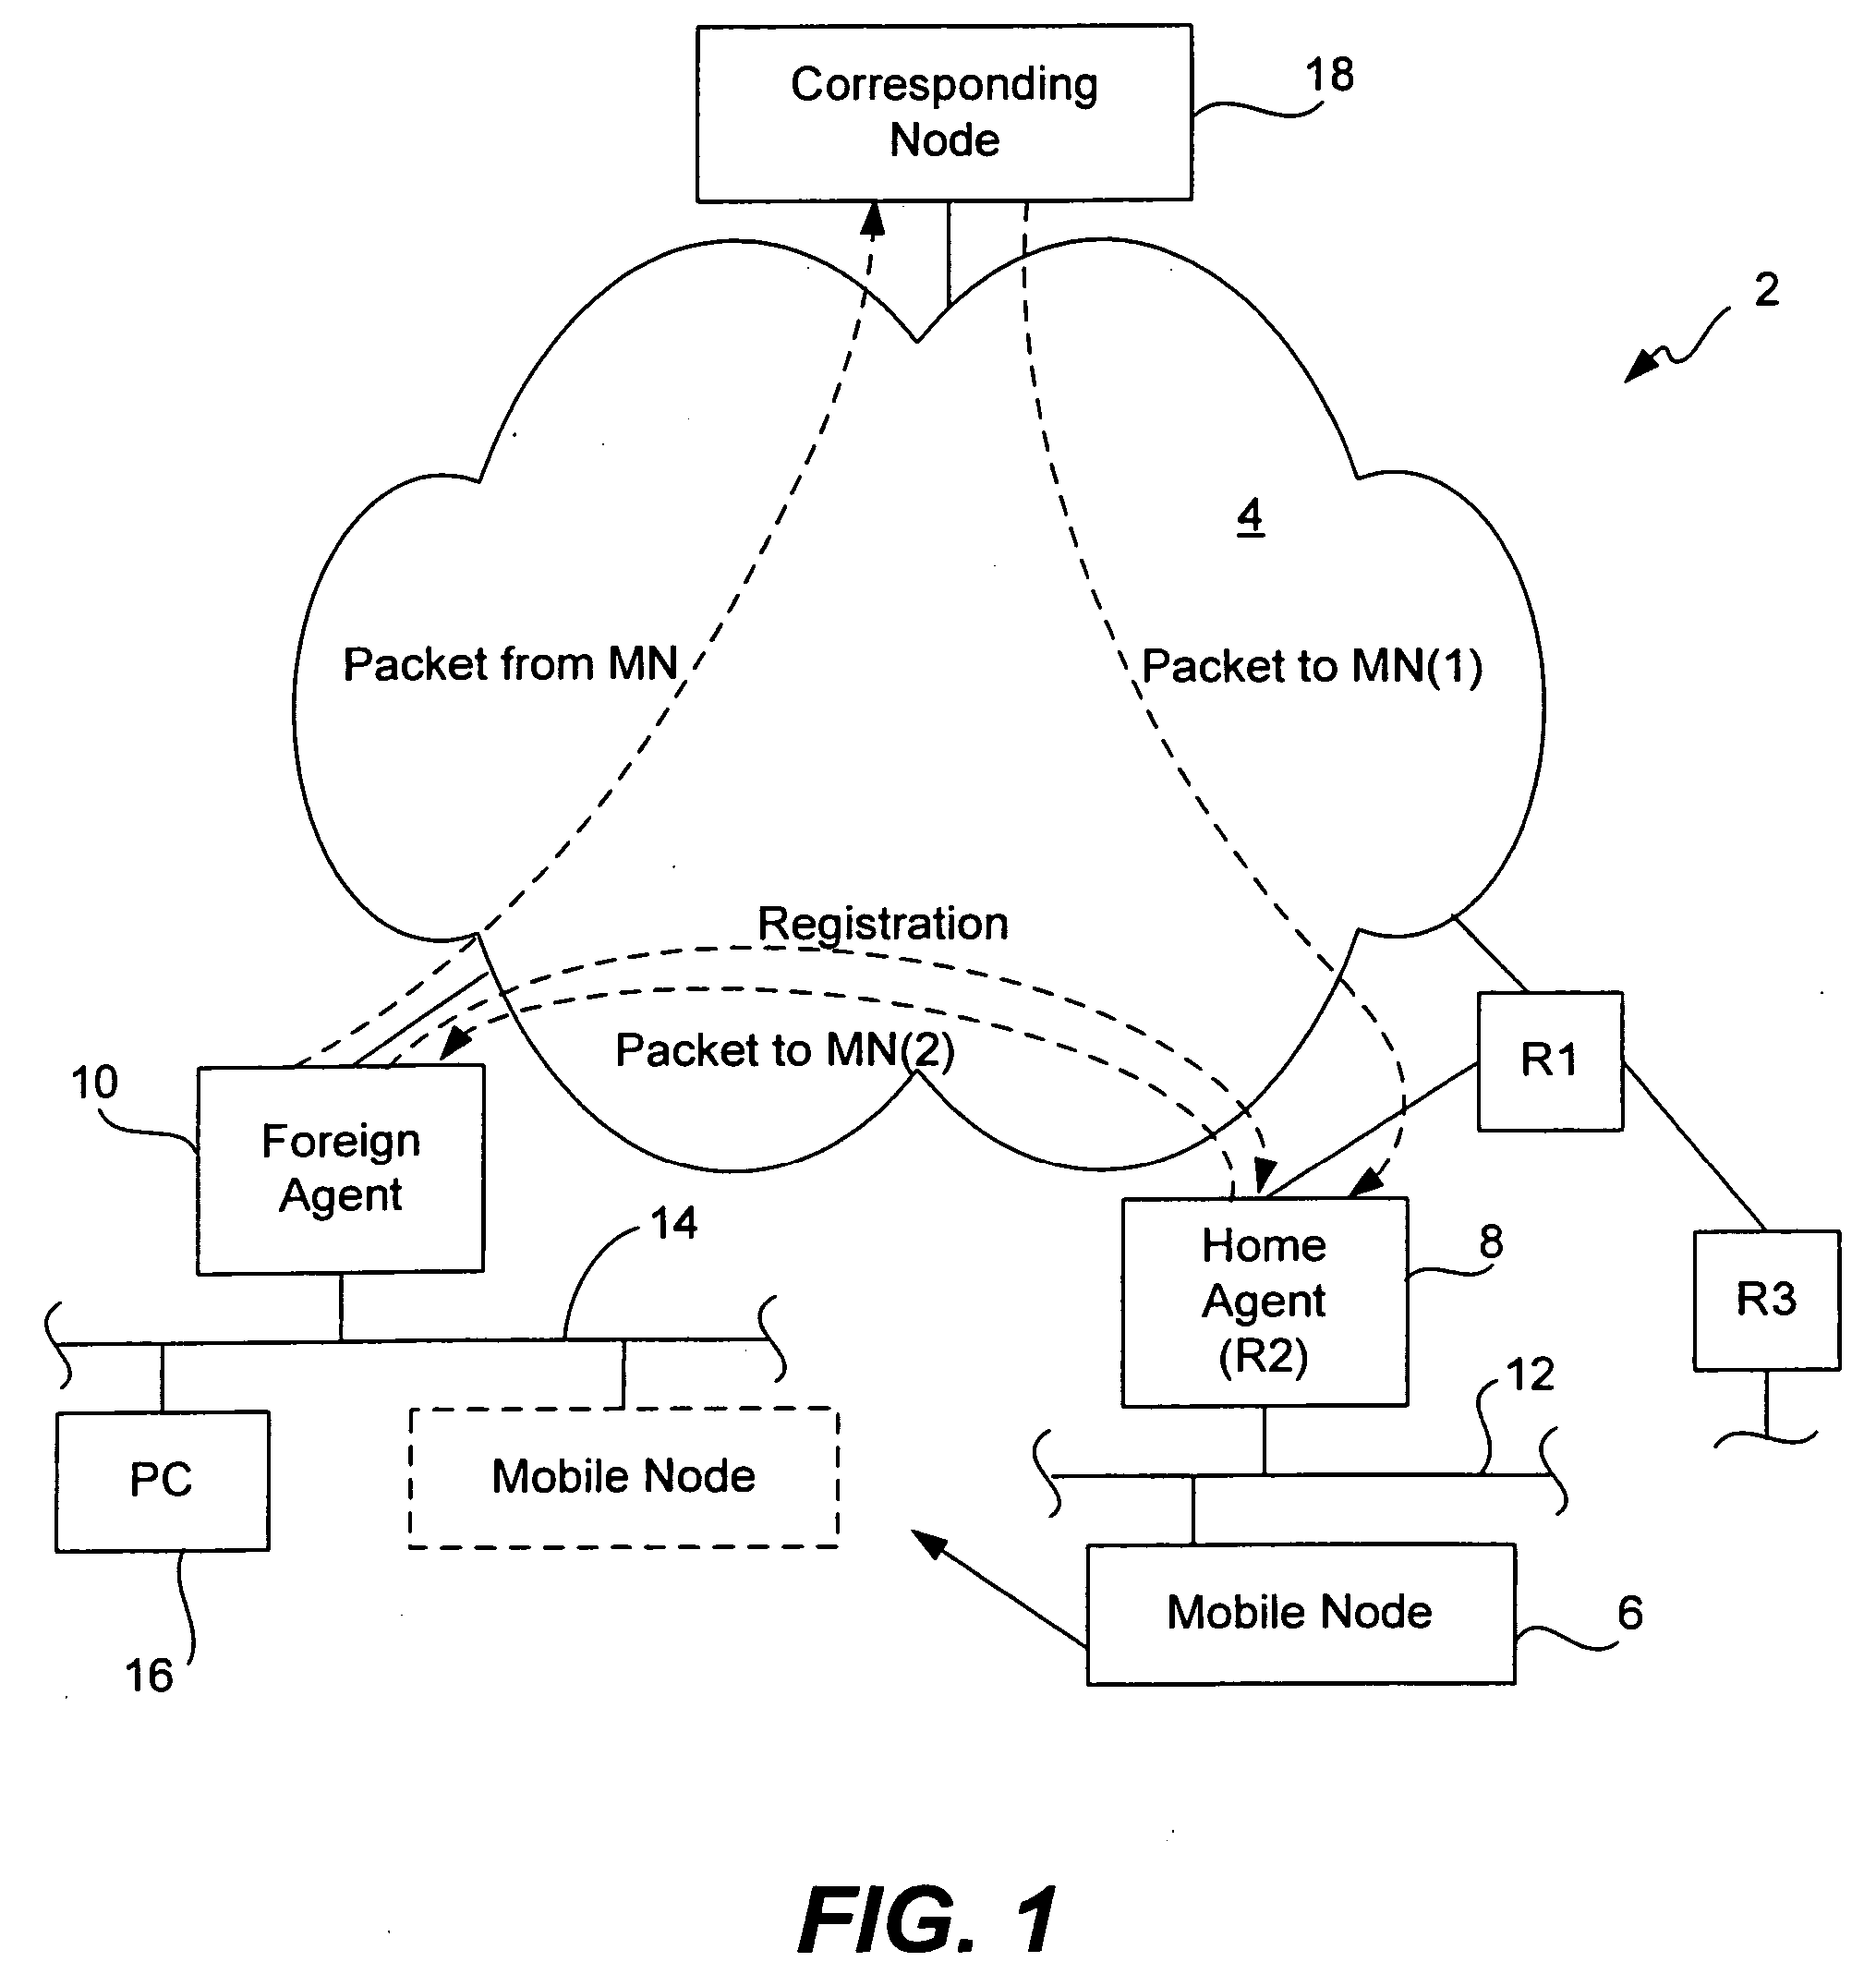 Methods and apparatus for using DHCP for home address management of nodes attached to an edge device and for performing mobility and address management as a proxy home agent